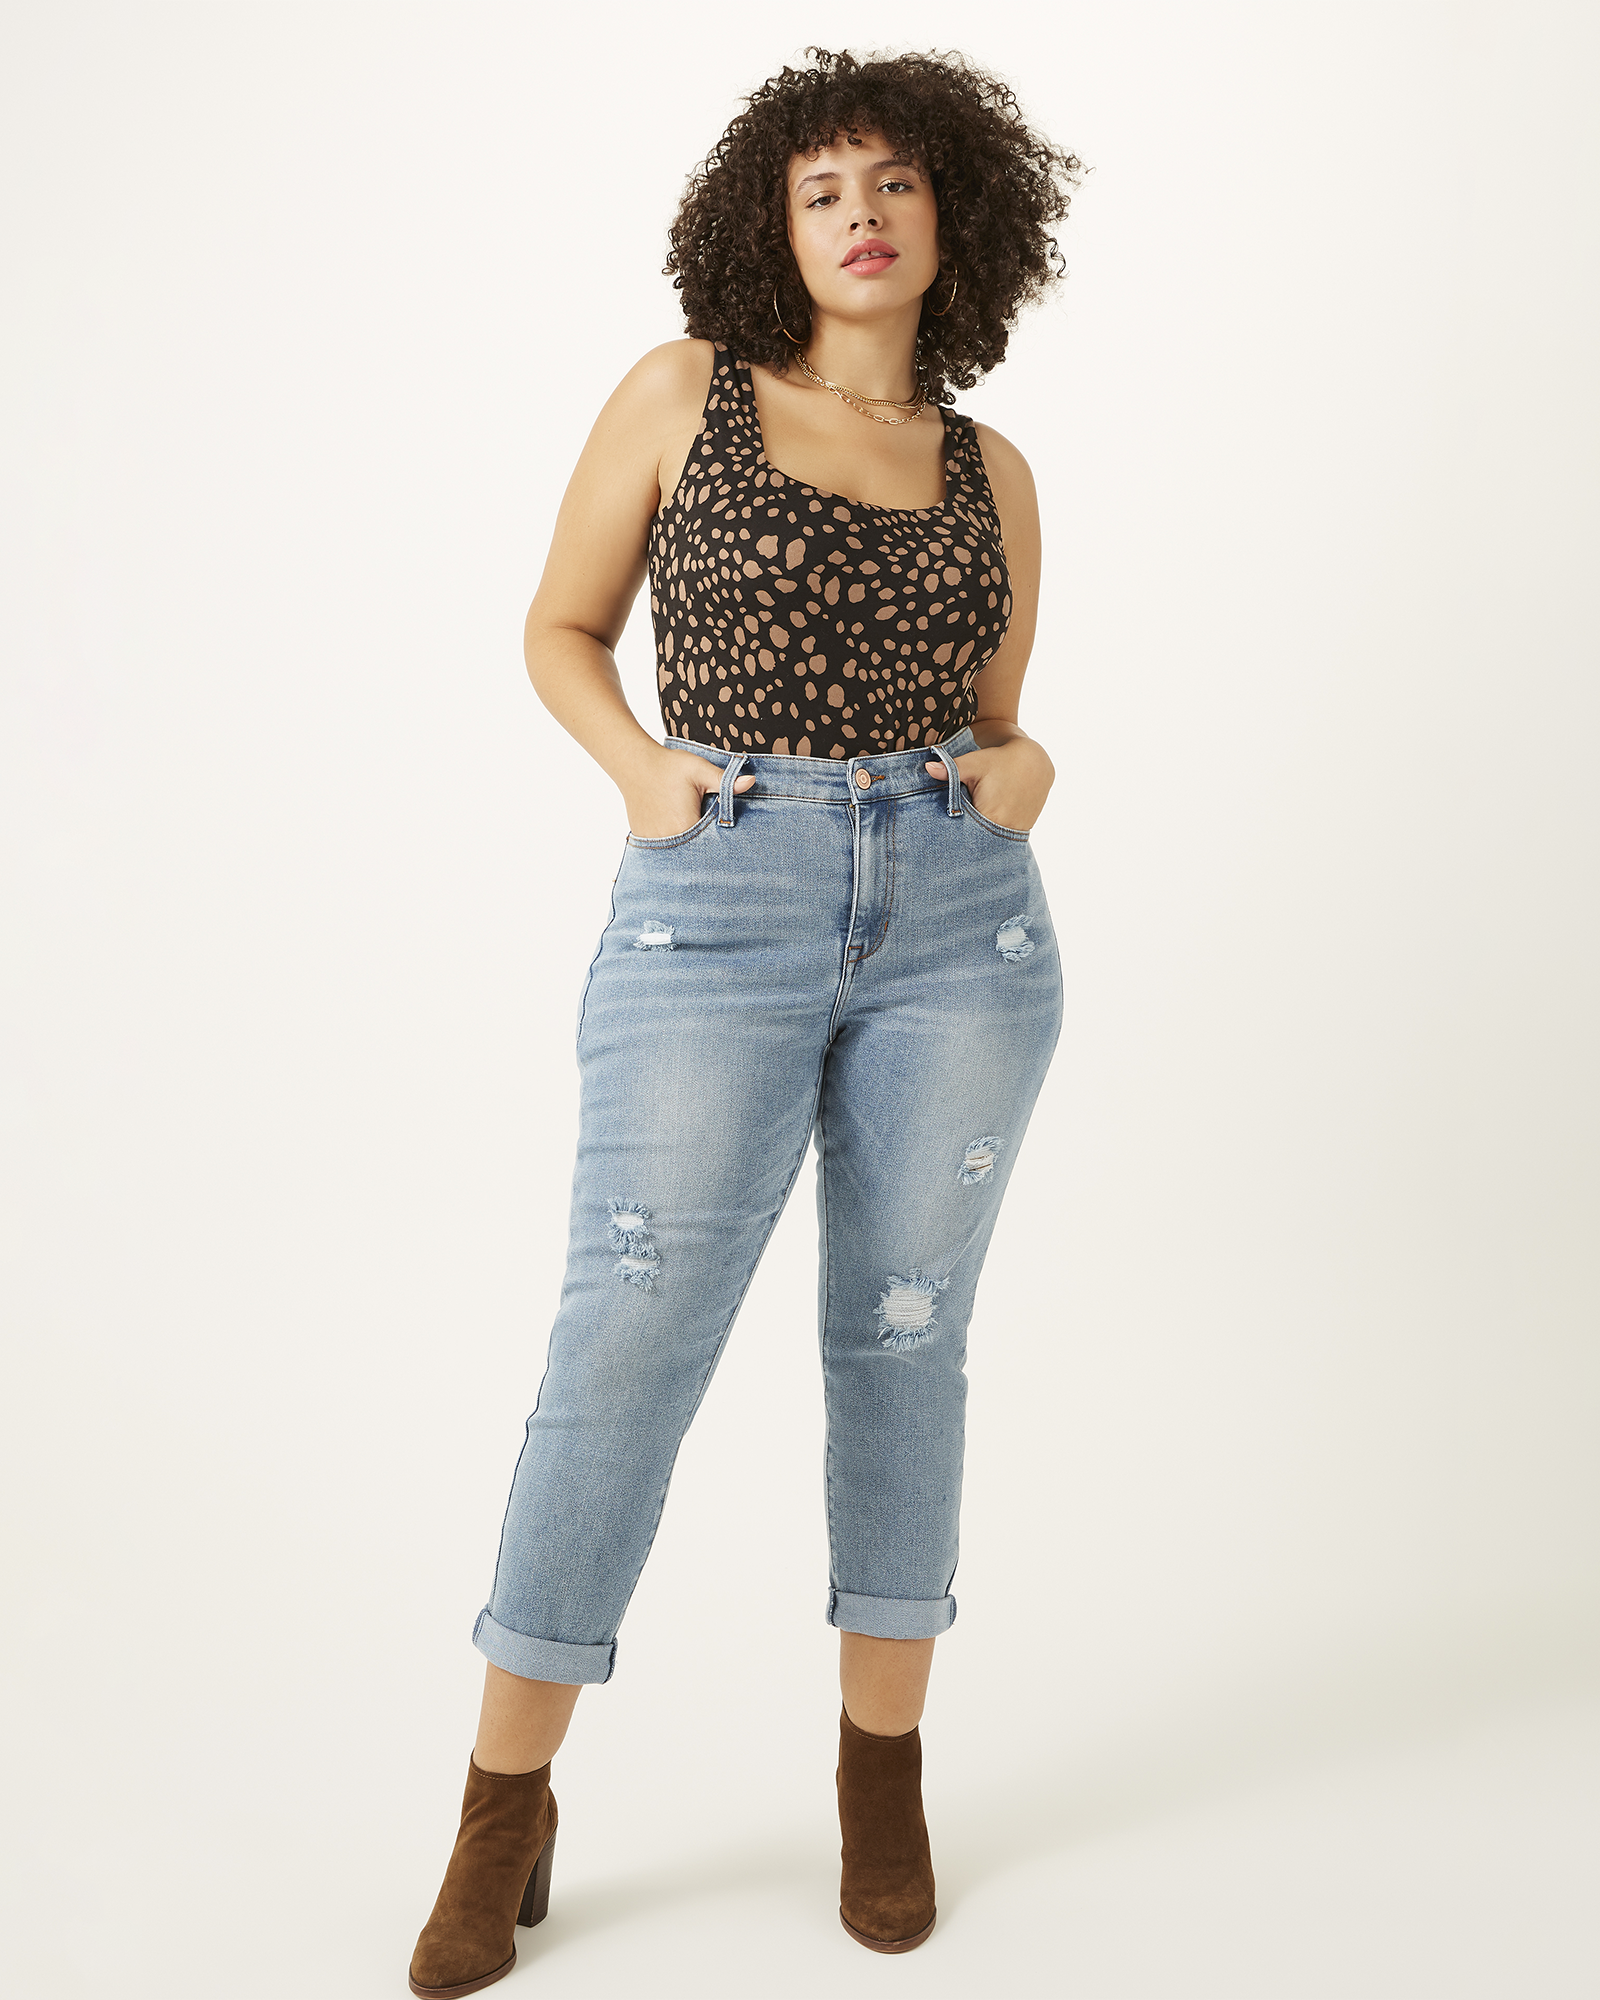 Plus Size Jeans Outfits